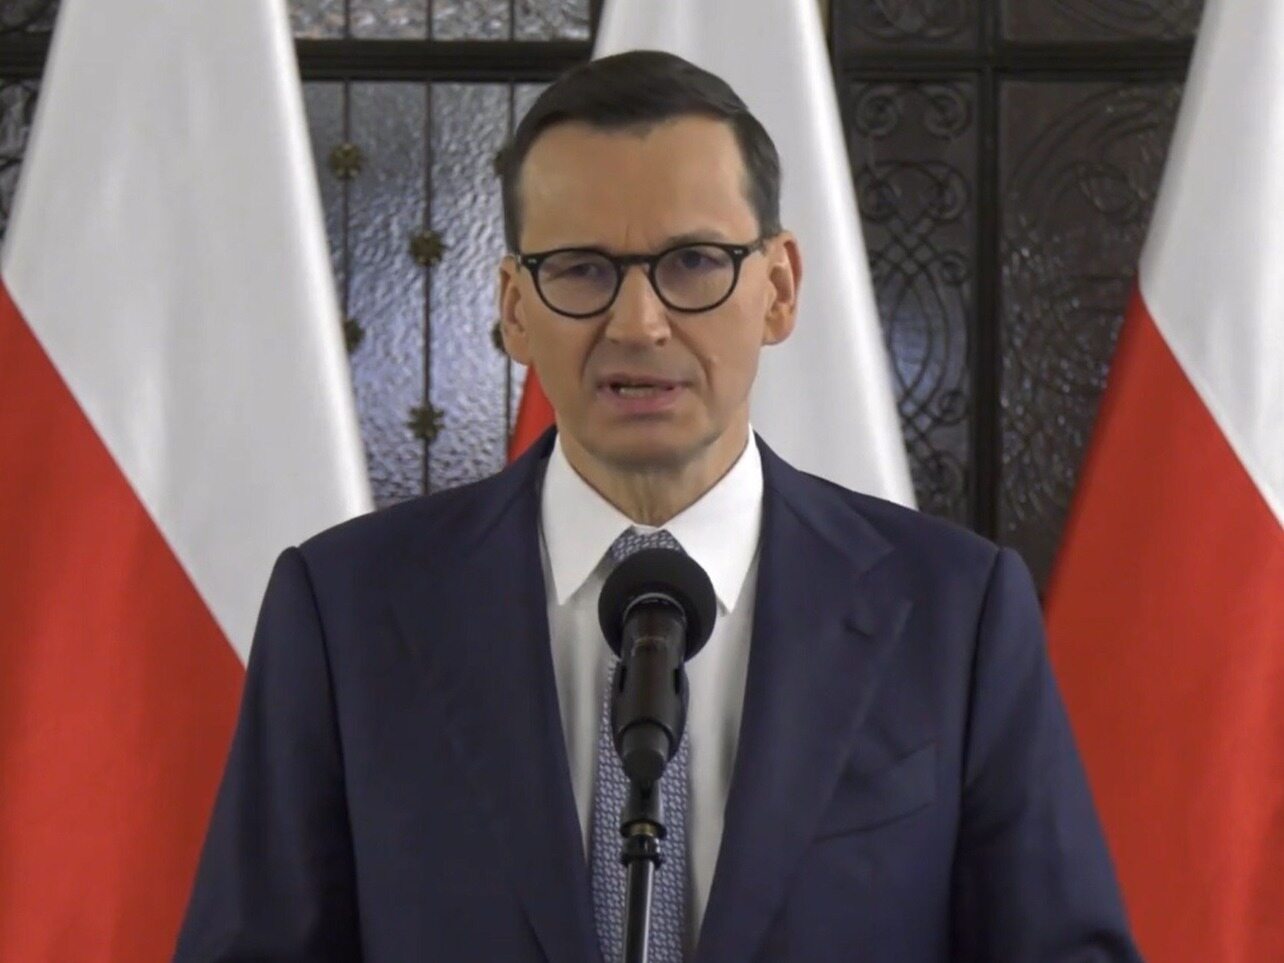 Meeting of the "Work Team for Poland".  Morawiecki announced two bills